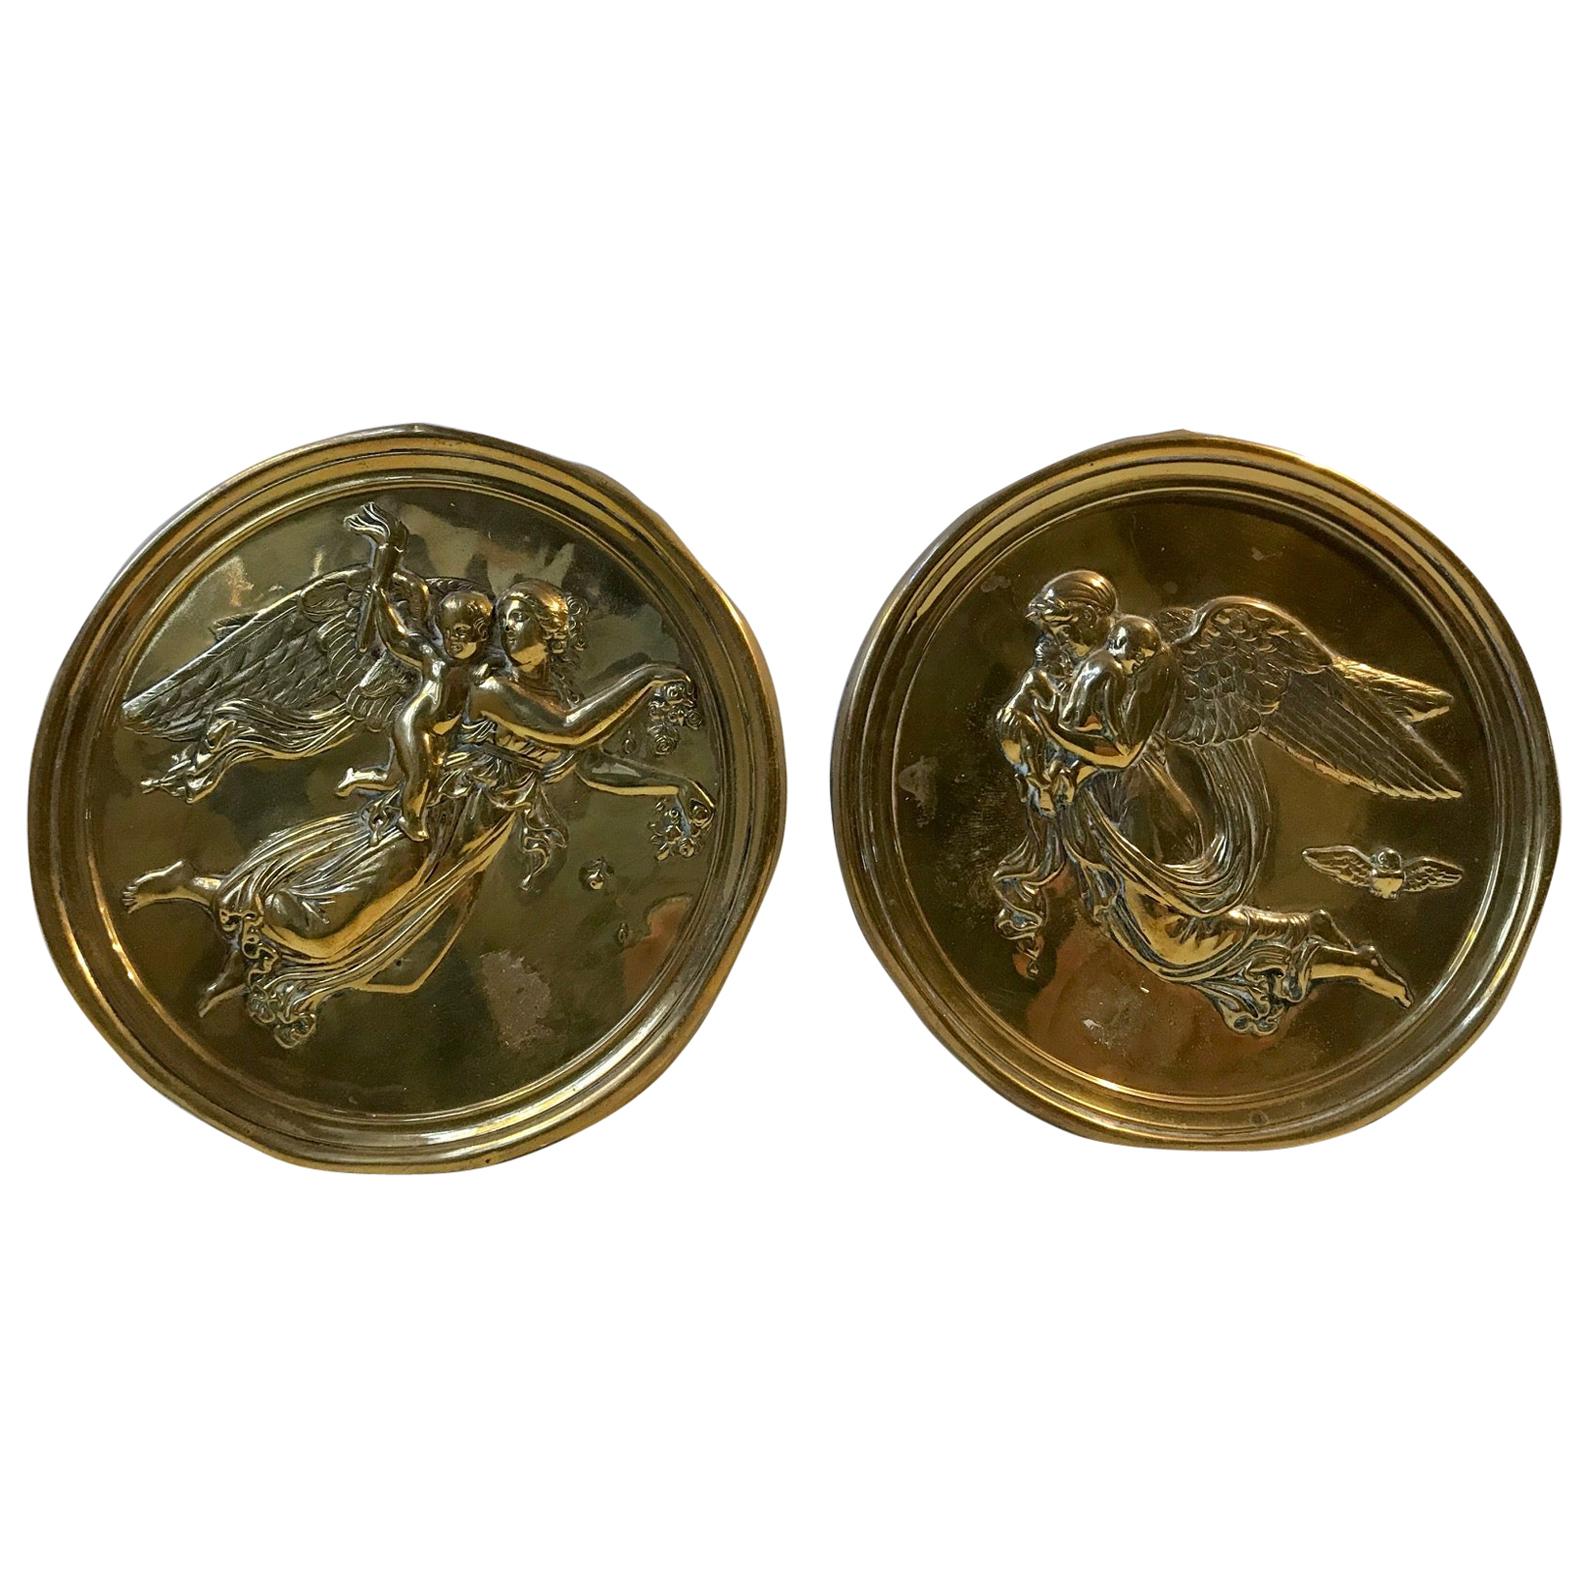 Victorian Brass Wall Plaques with Woman and Angles, 19th Century, England For Sale